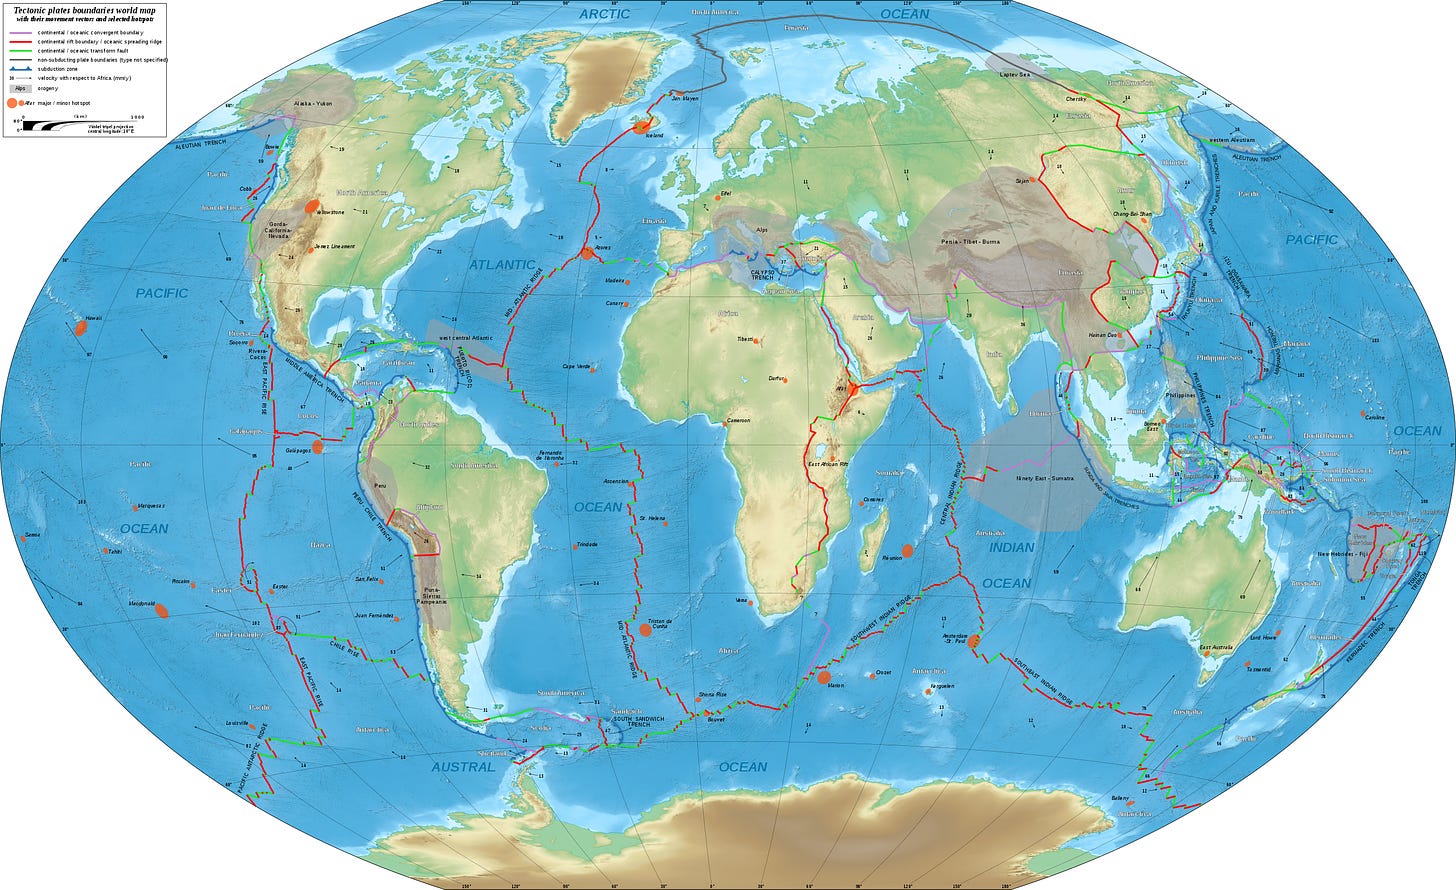 World map of tectonic plates, showing faults & hot zones